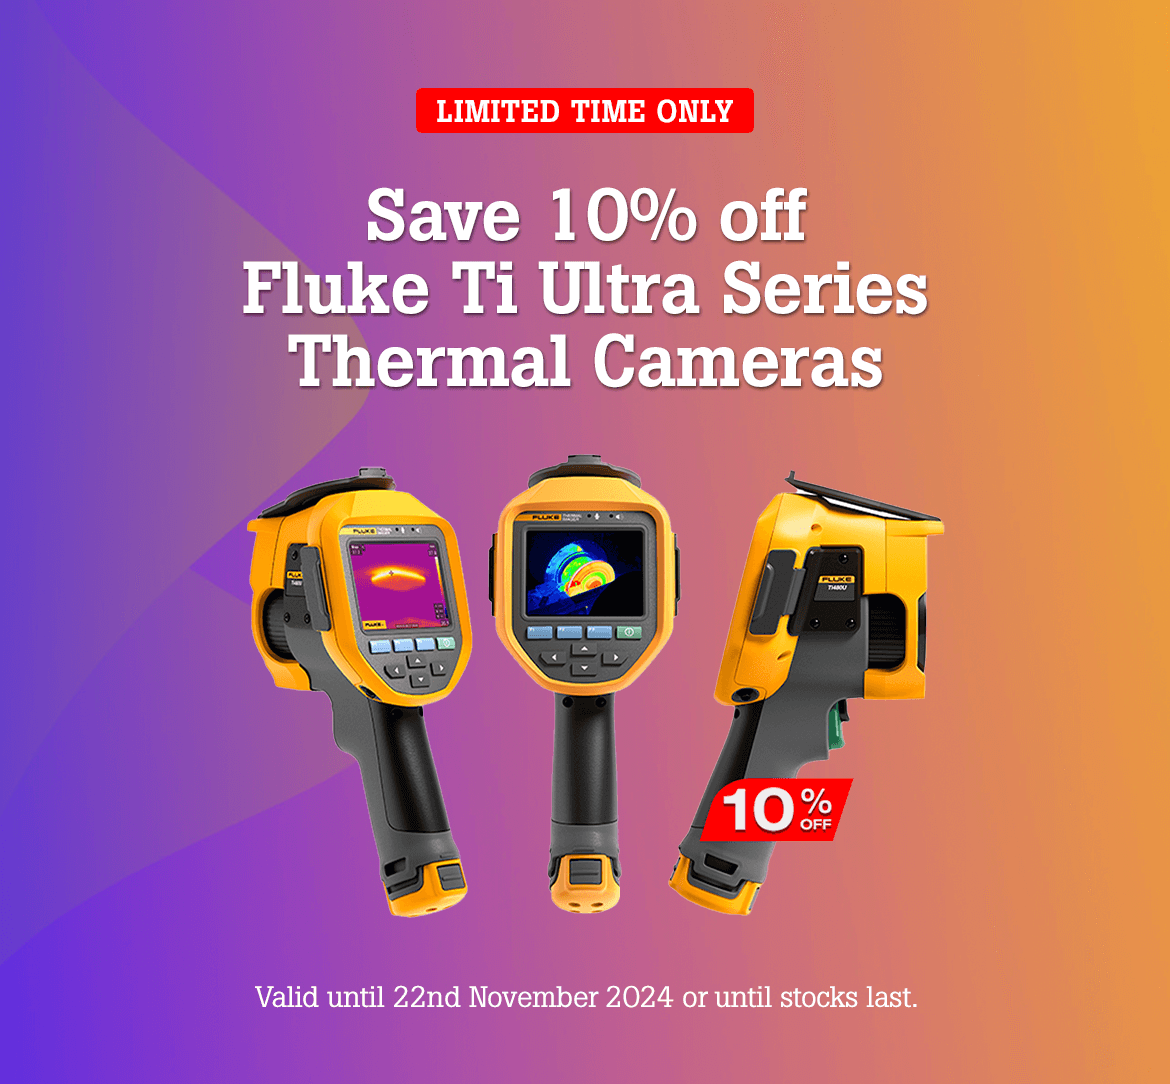 Save 10% off Fluke Ti Ultra Series Infrared Thermal Cameras